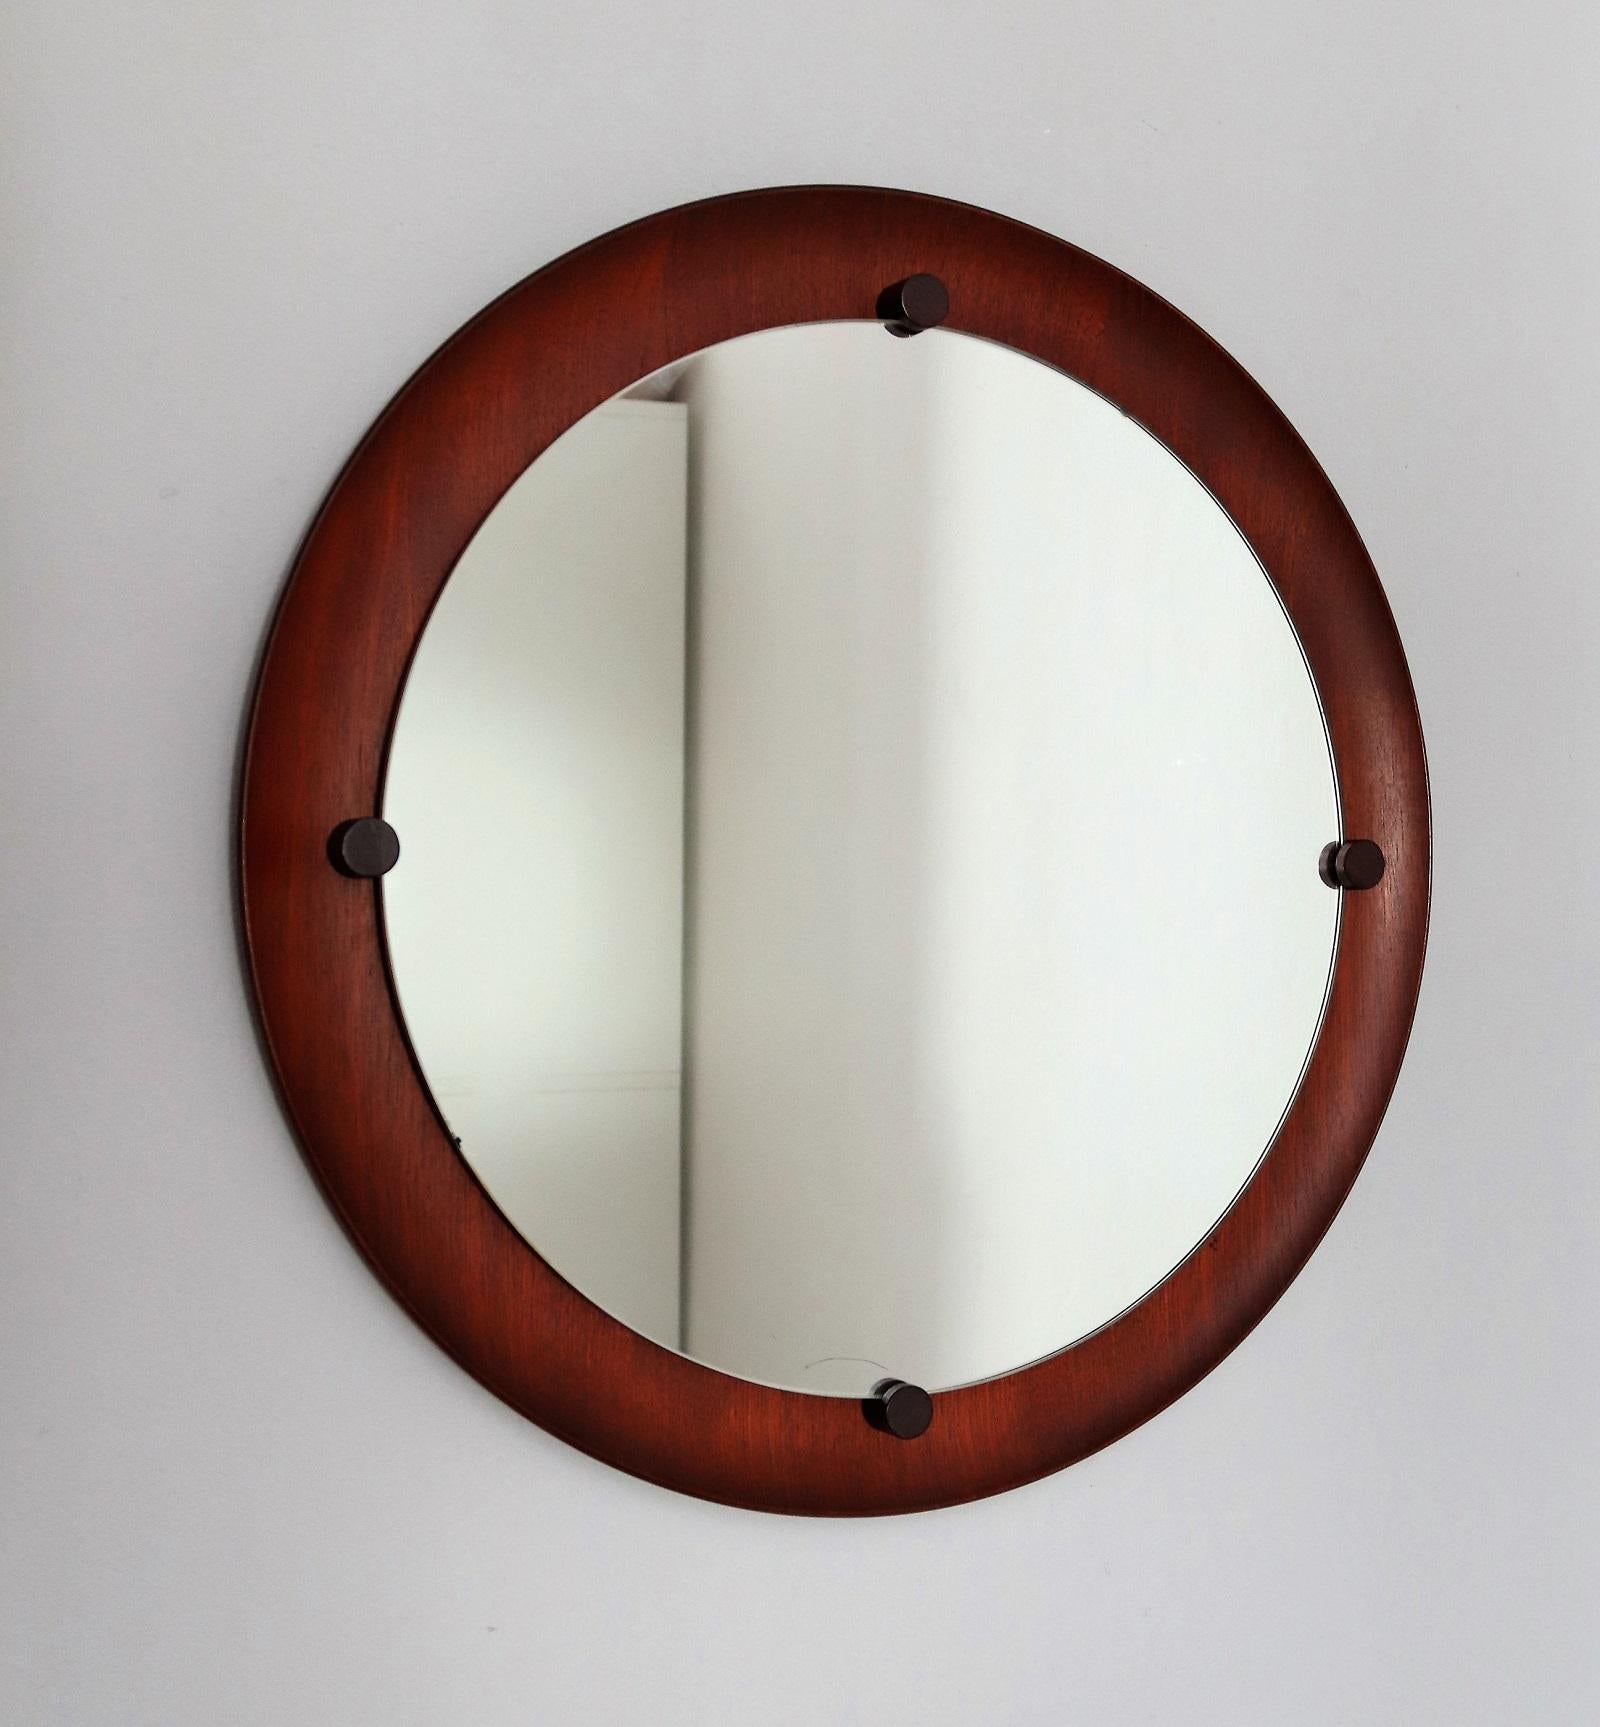 Beautiful round wall mirror made of a curved teak wood base with four wooden colored brackets, which hold the mirror in front of 50 cm (19.7in).
Made in Italy in the 1960s approx.
Backside a cord for wall hanging and a stamp of Italian Manufacturing